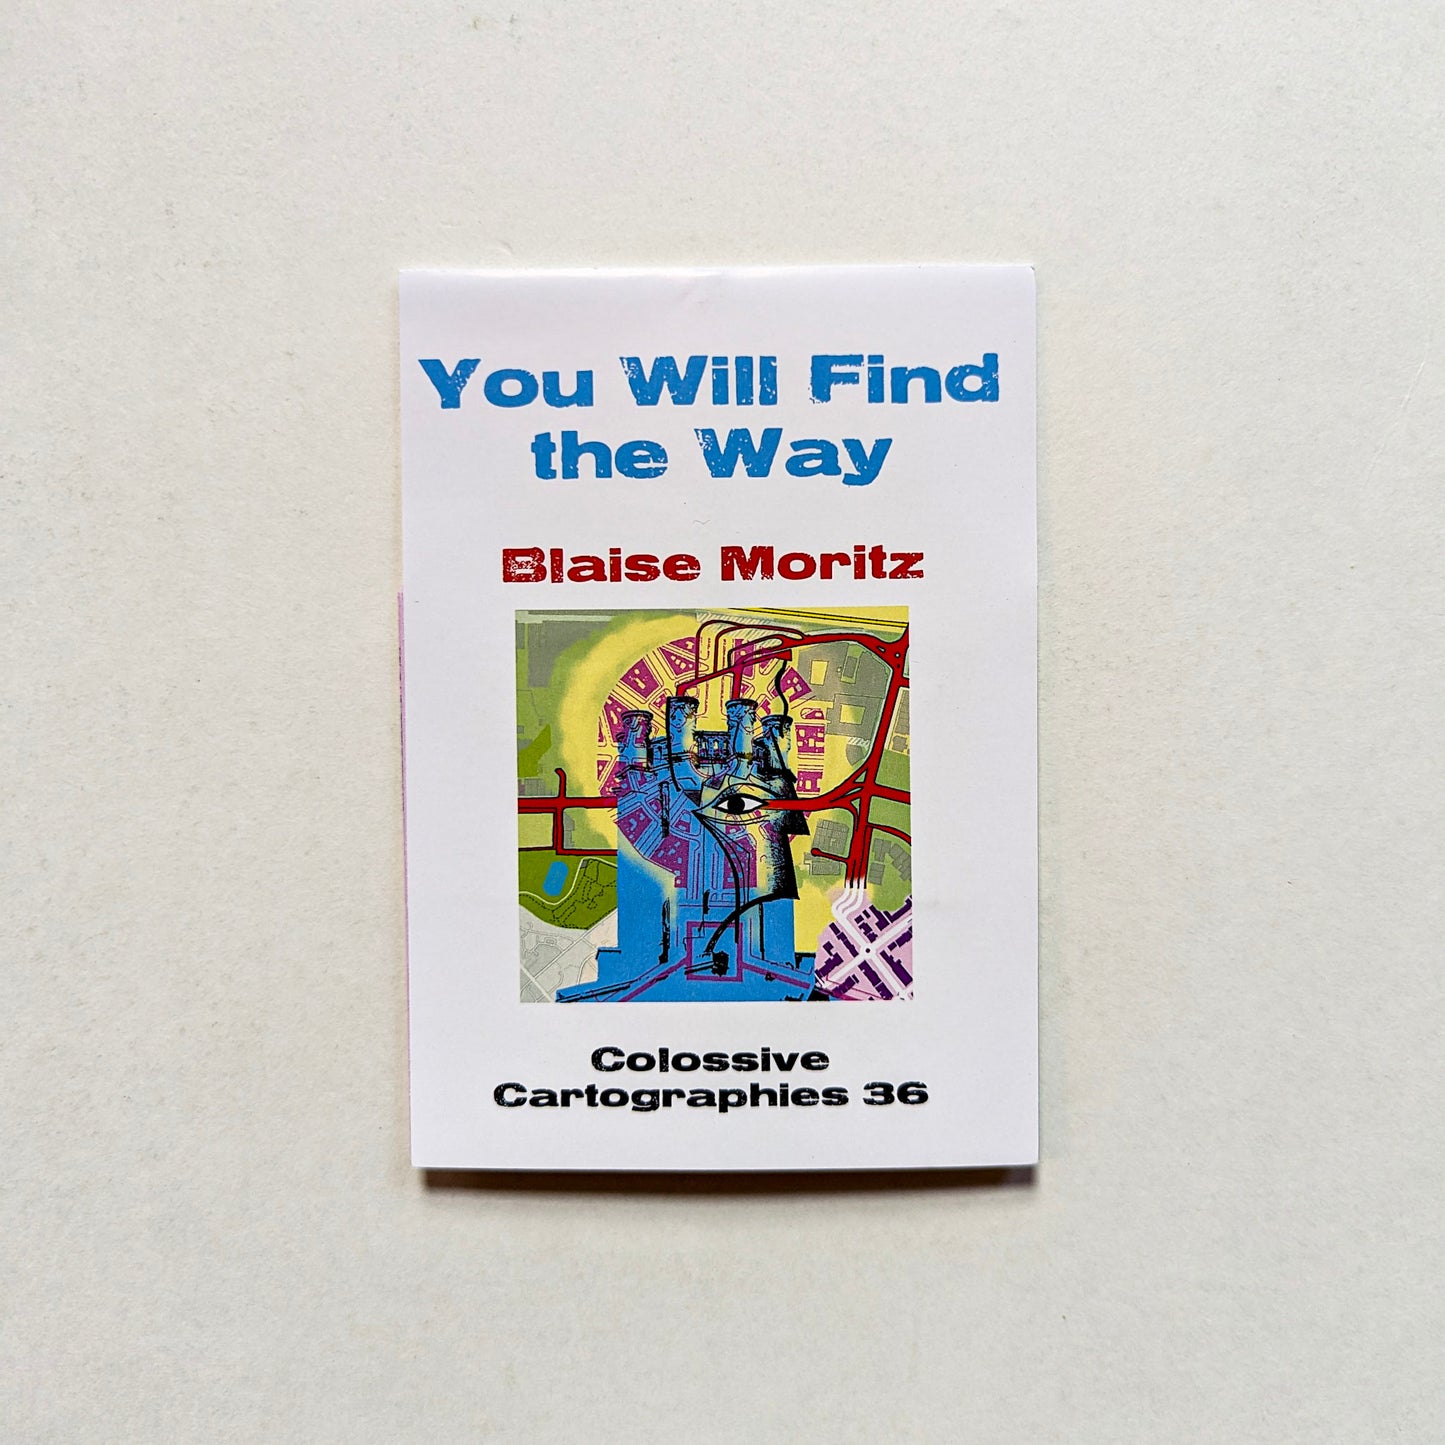 You Will Find the Way by Blaise Moritz (Colossive Cartographies 36)